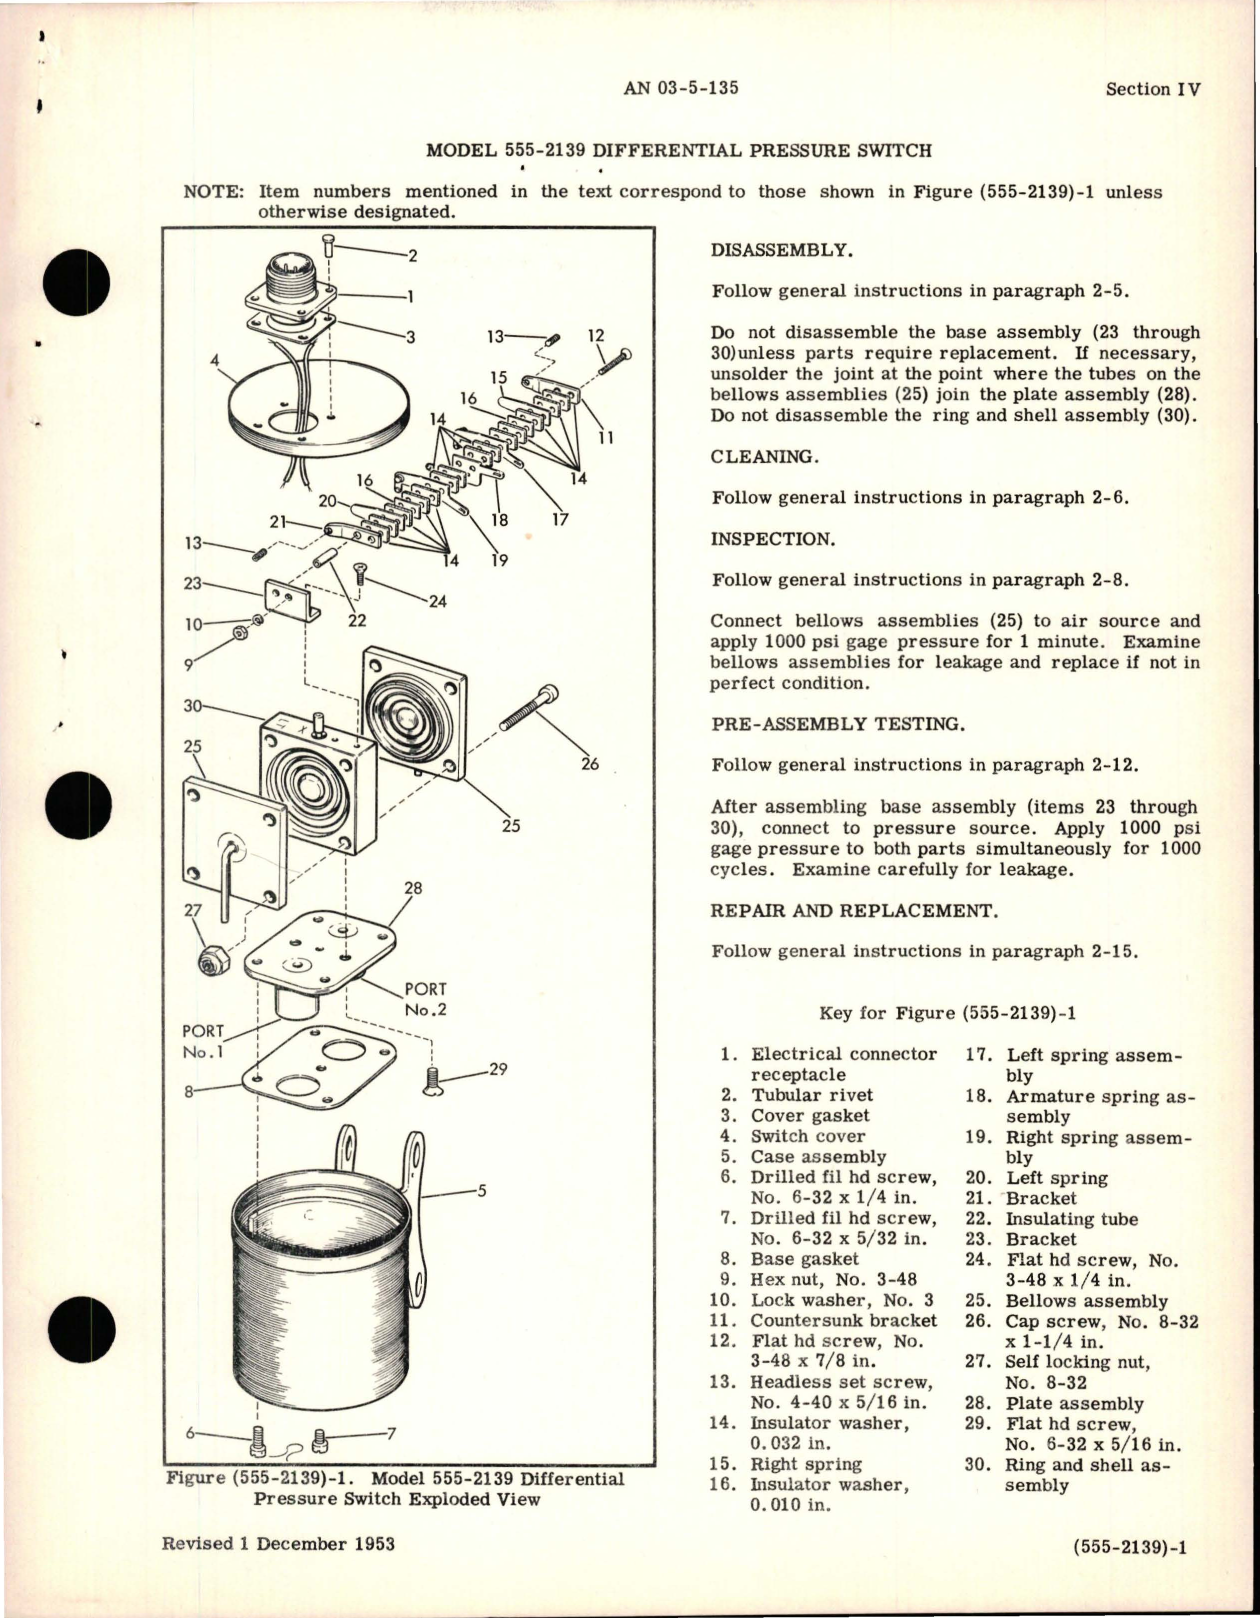 Sample page 5 from AirCorps Library document: Overhaul Instructions for Pressure Control Switches